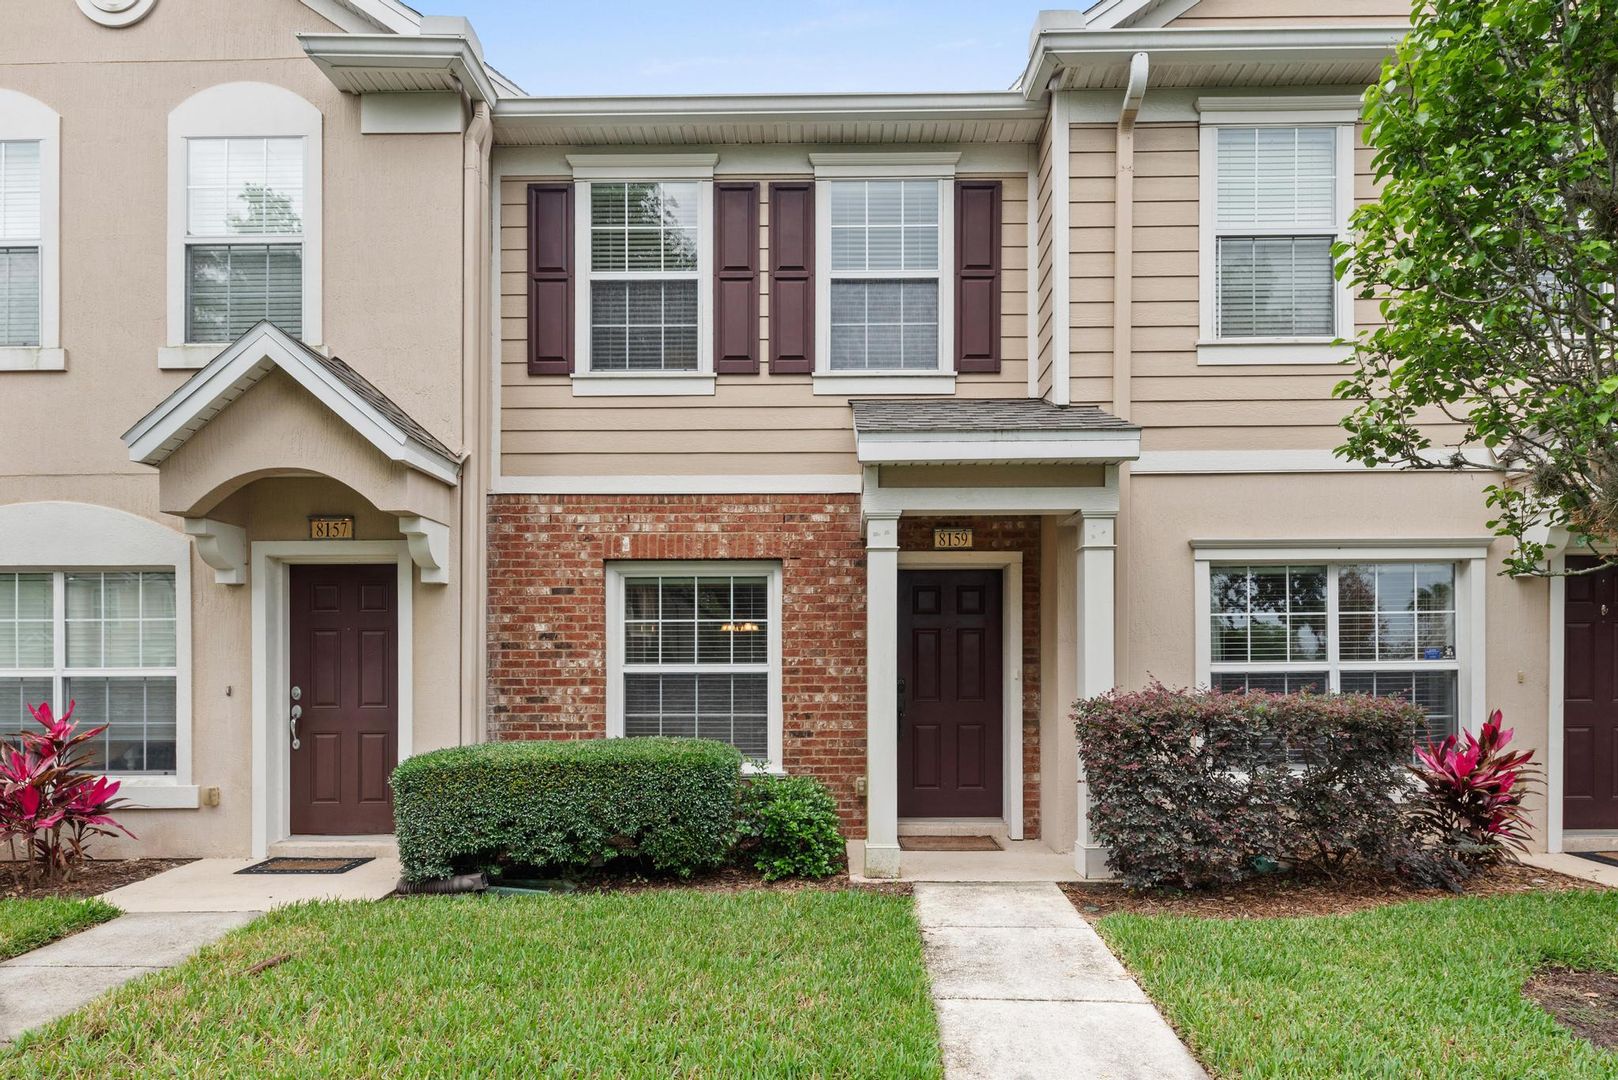 2 Bed/2.5 Bath Summerfield Townhome! Great Location and Amenities at an affordable price!